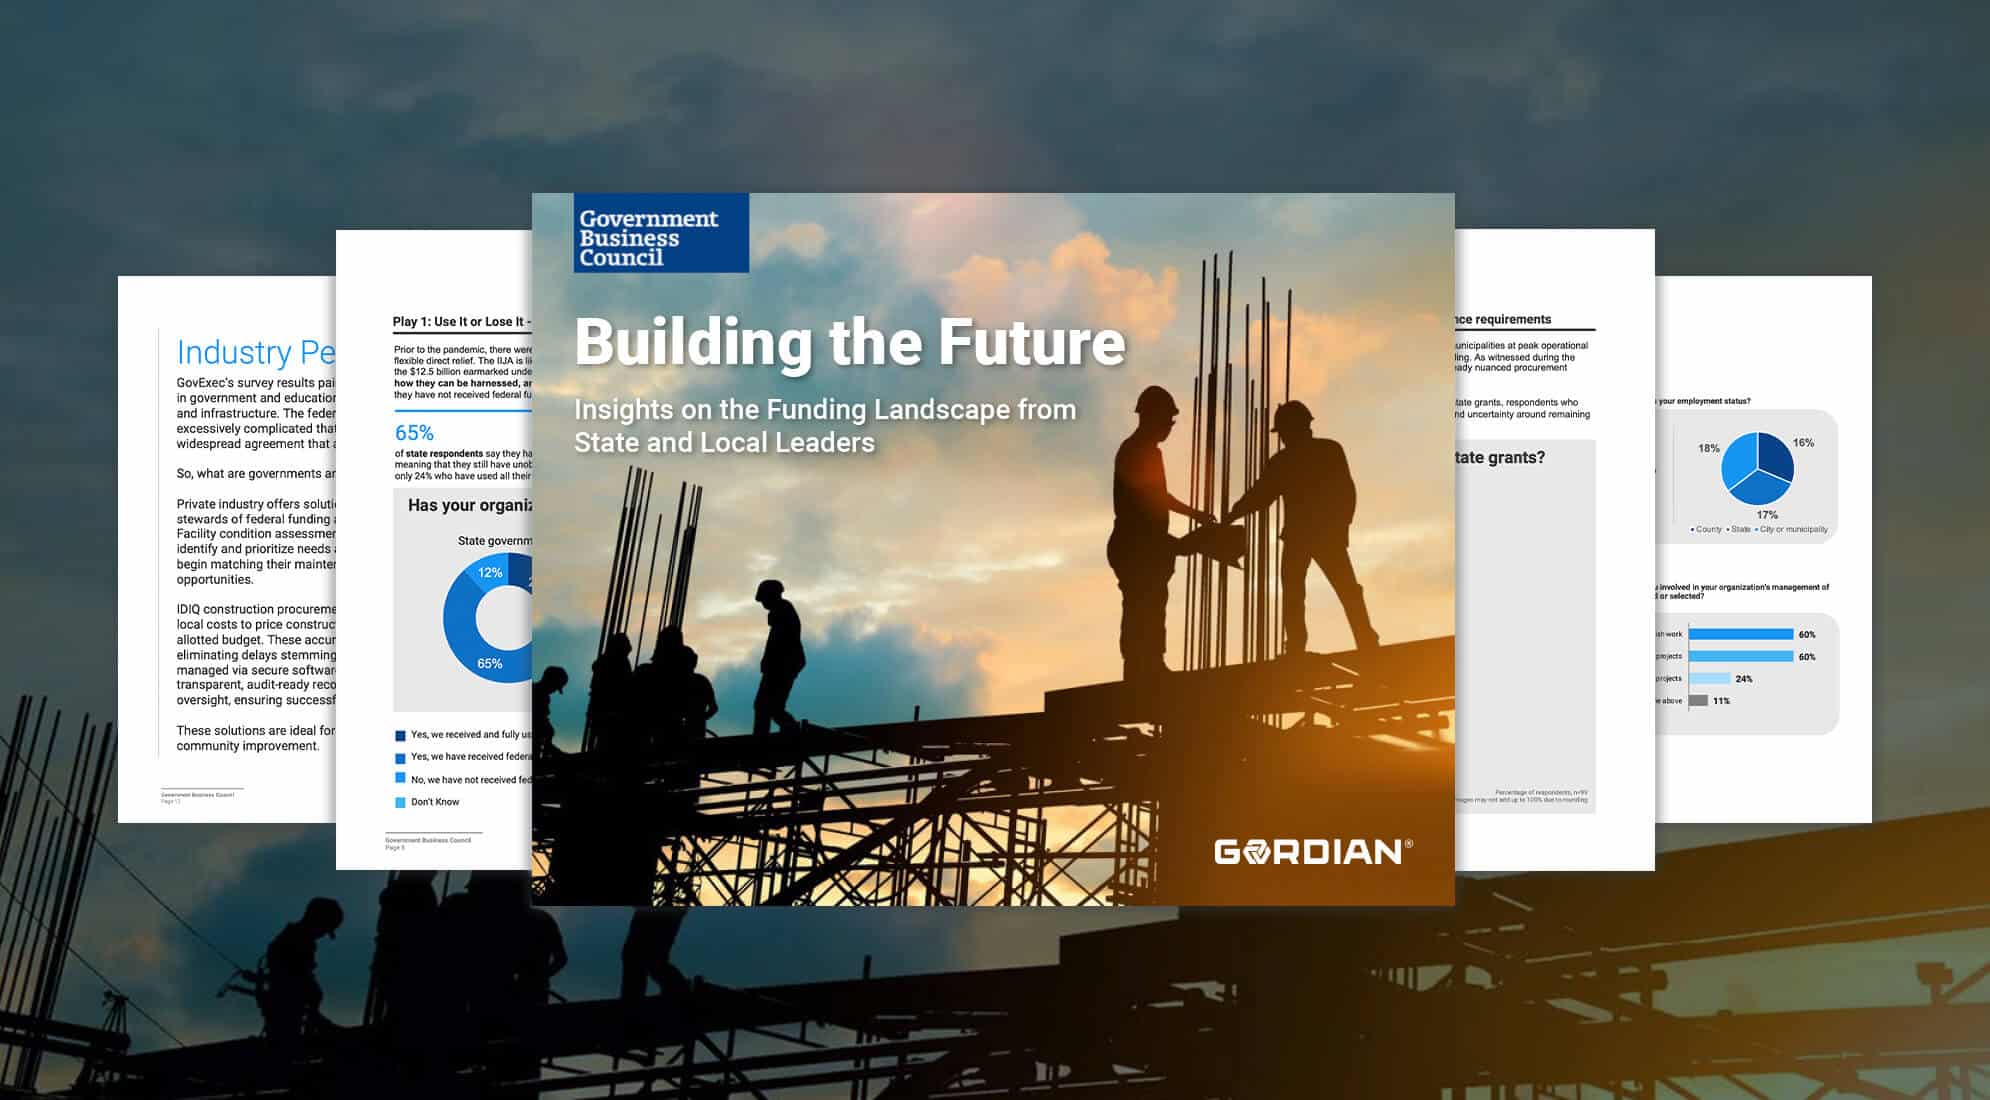 Building the Future: What Public Sector Leaders Say About Using State and Federal Aid 2